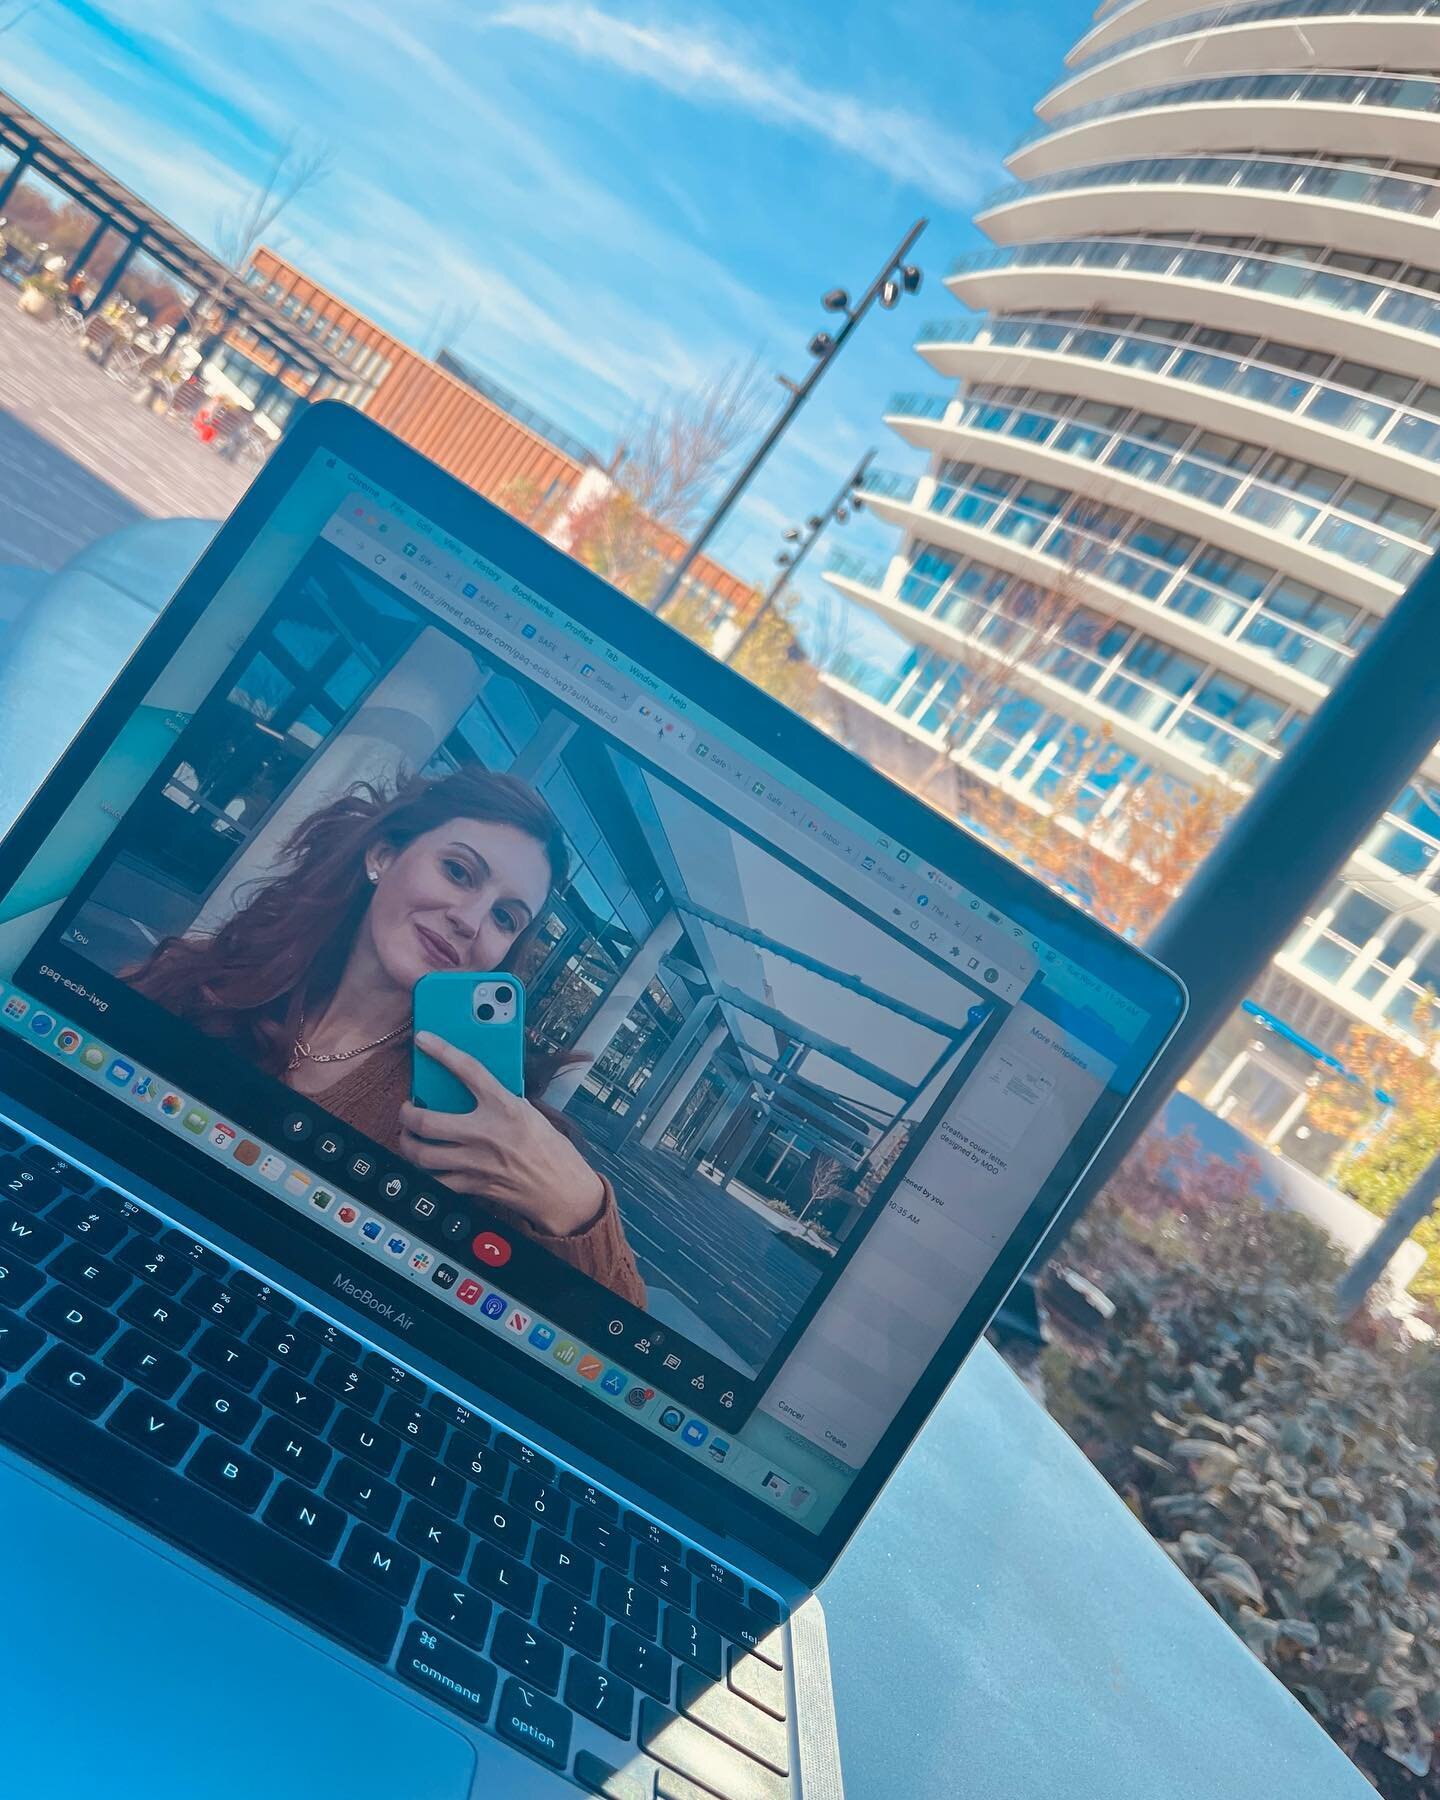 It&rsquo;s that time of the week again&hellip; another #WhereAreWeWorkingToday this week with @laurenmcmillen at the @thewharfdc 🛥️ 

&ldquo;It&rsquo;s getting chilly so I won&rsquo;t get many more of these days 🥶 but when the ☀️ is out, I love spe